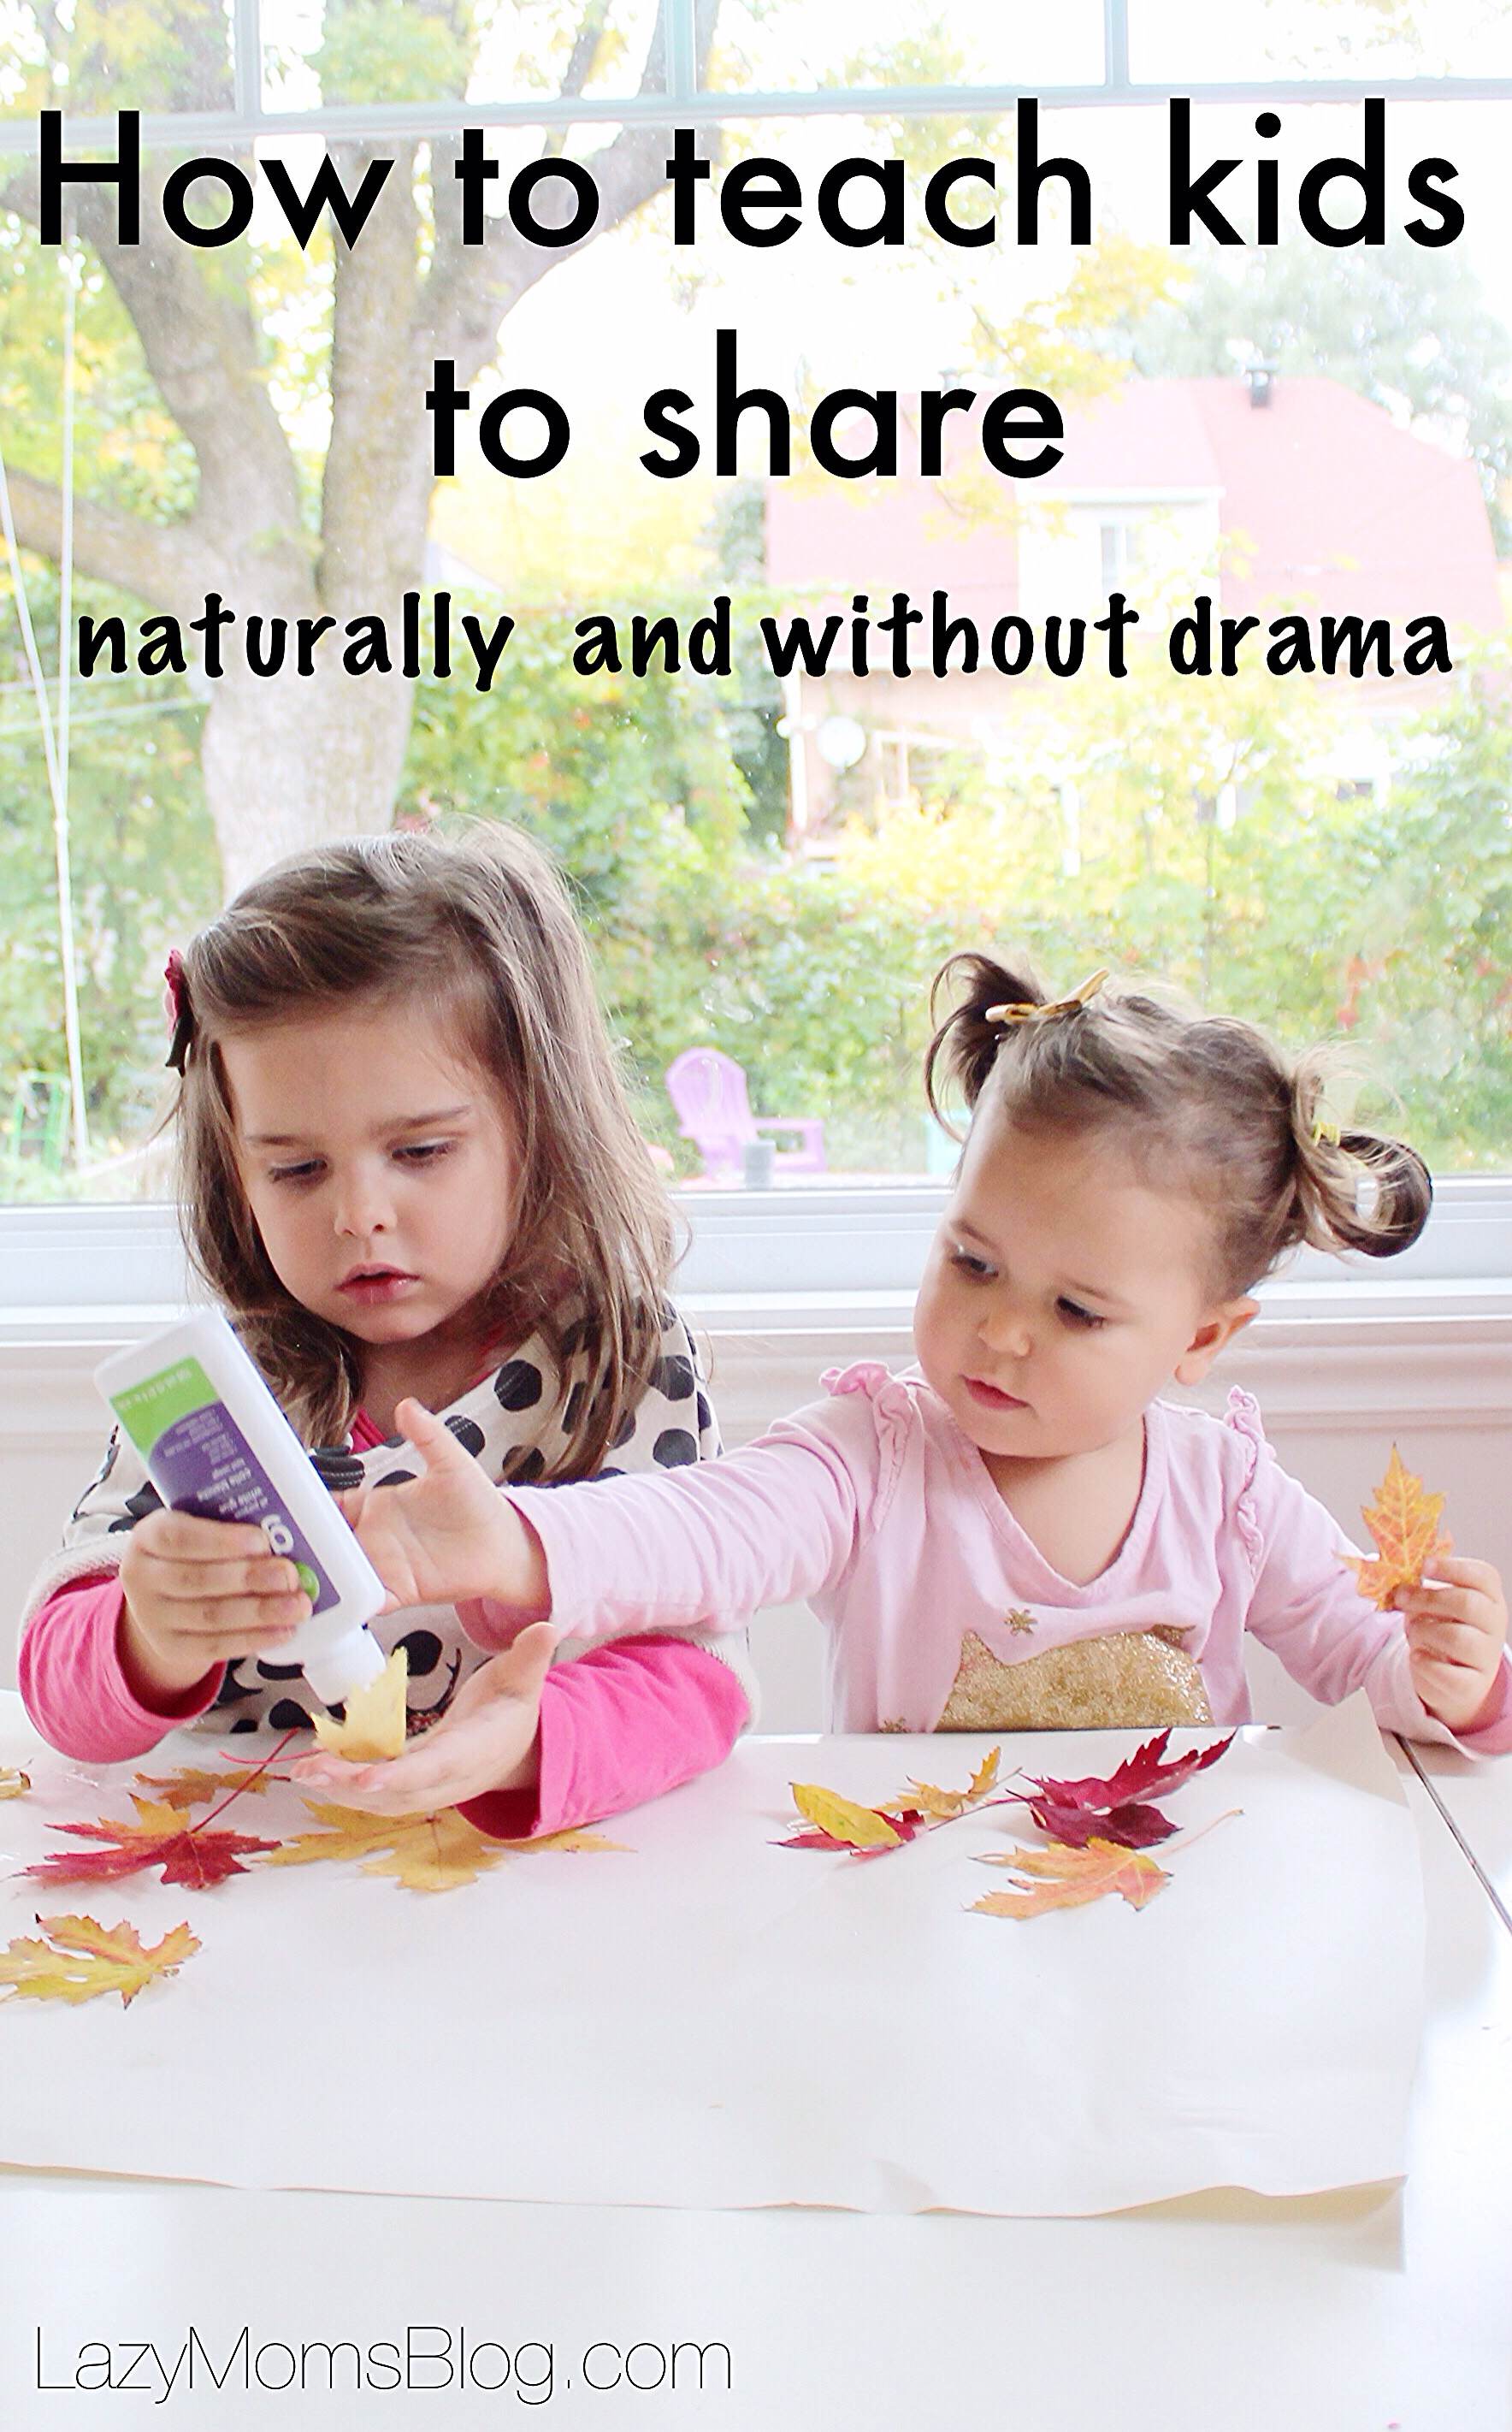 How to teach kids to share, naturally, without the drama, and making it fun. Simple parenting tricks that work! 